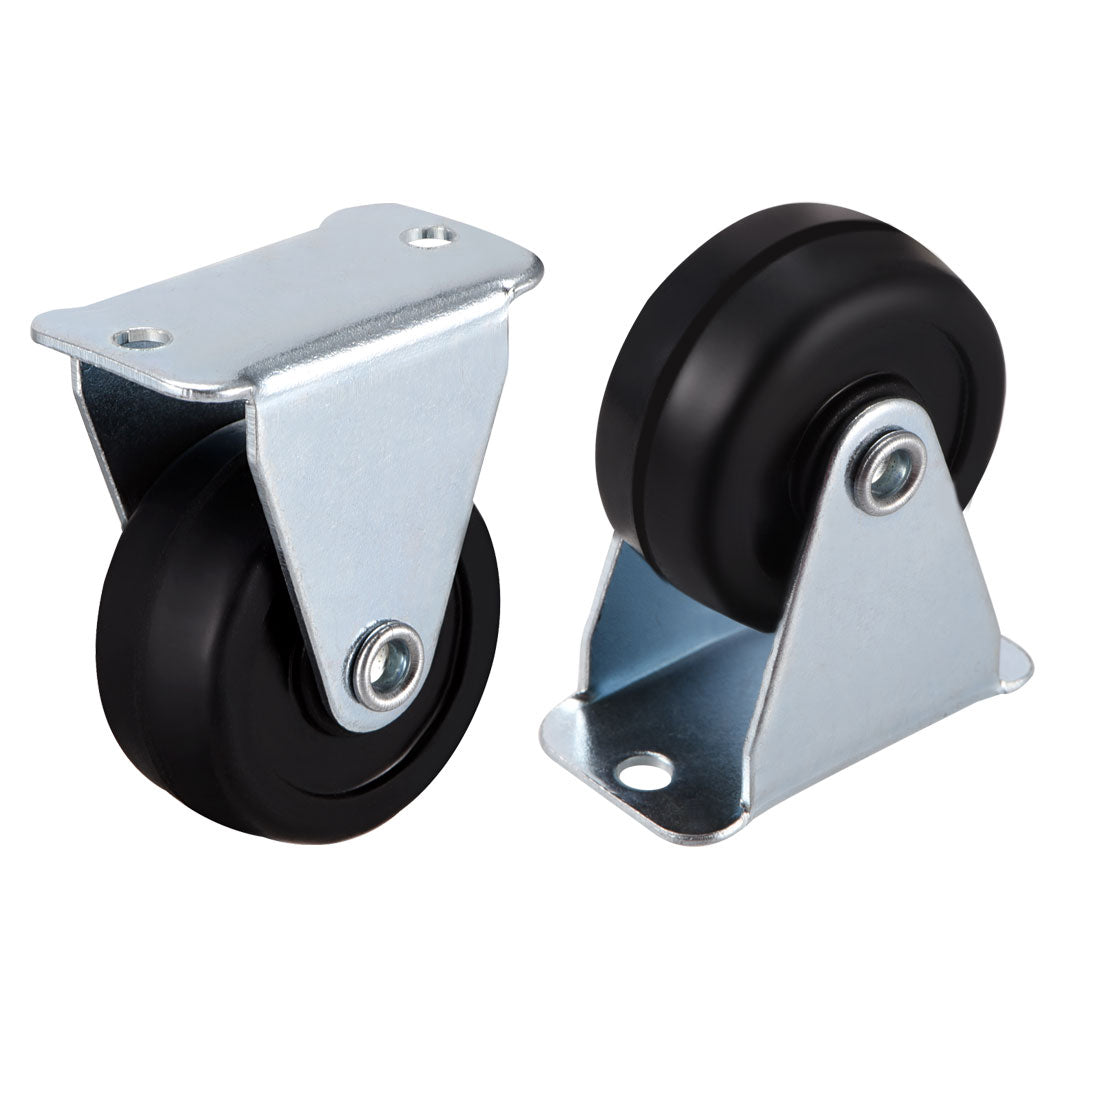 Uxcell Uxcell 1.25 Inch Fixed Casters Wheels Rubber Top Plate Mounted Caster Wheel 22lb Capacity 2 Pcs